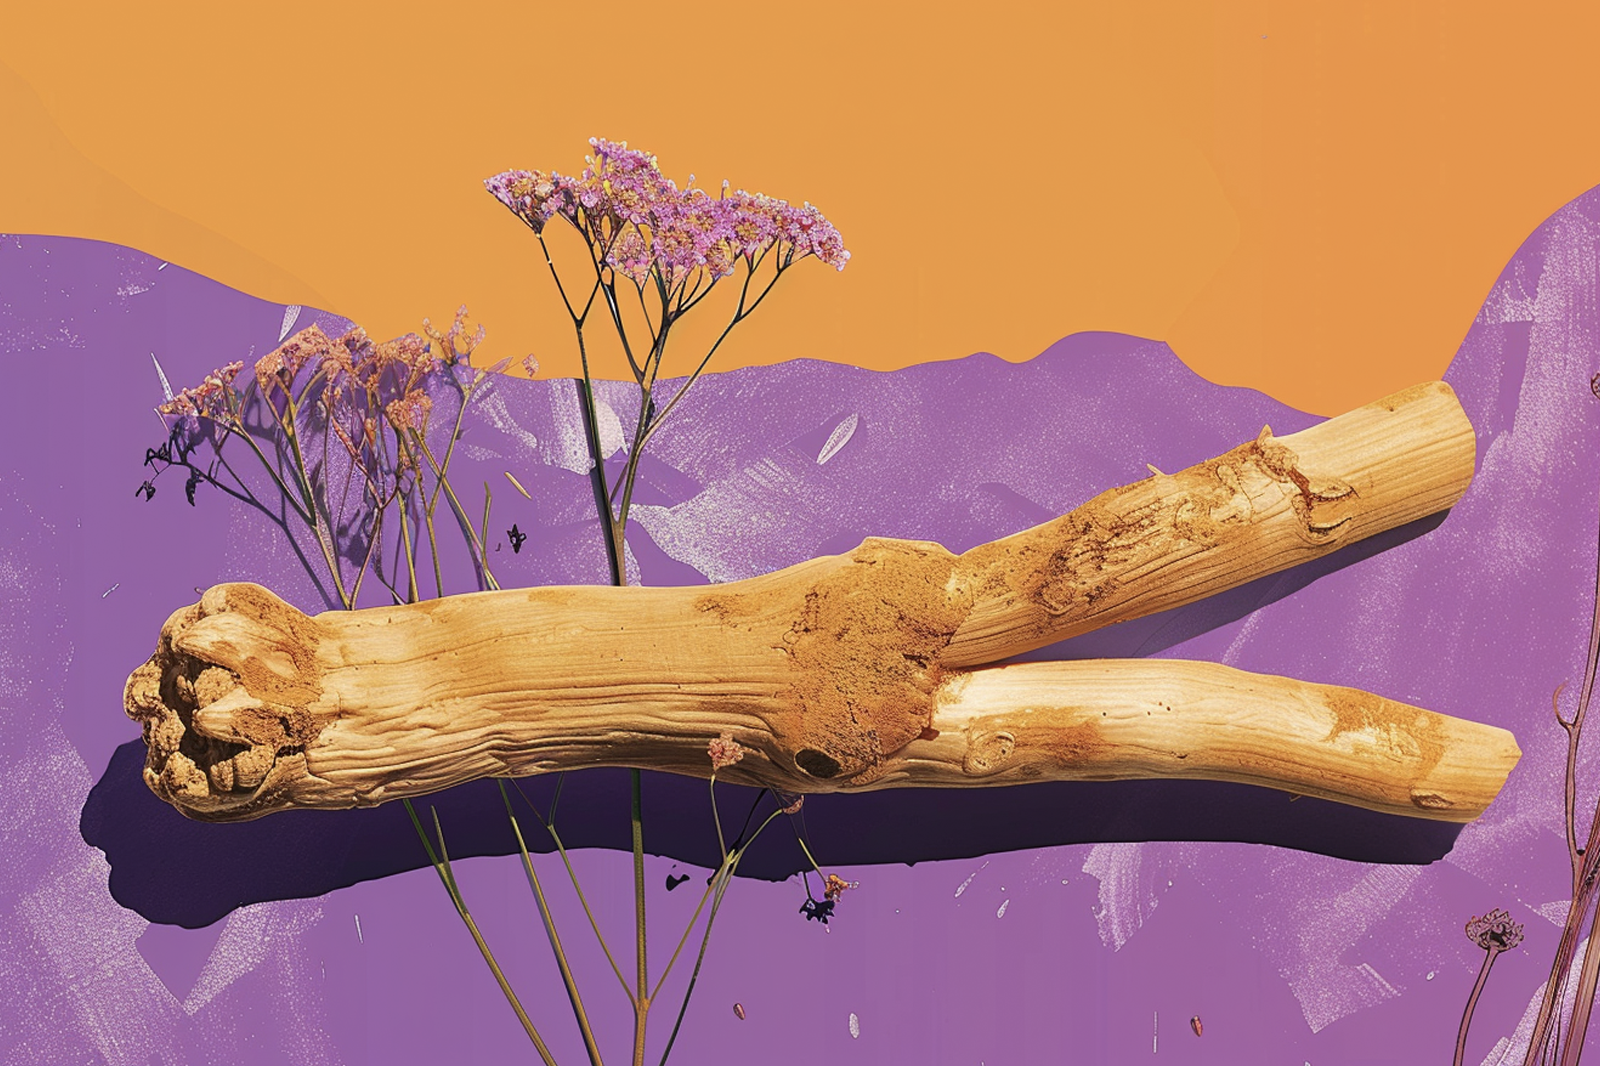 Valerian Root in rustic setting with mountain backdrop, offering natural sleep aid